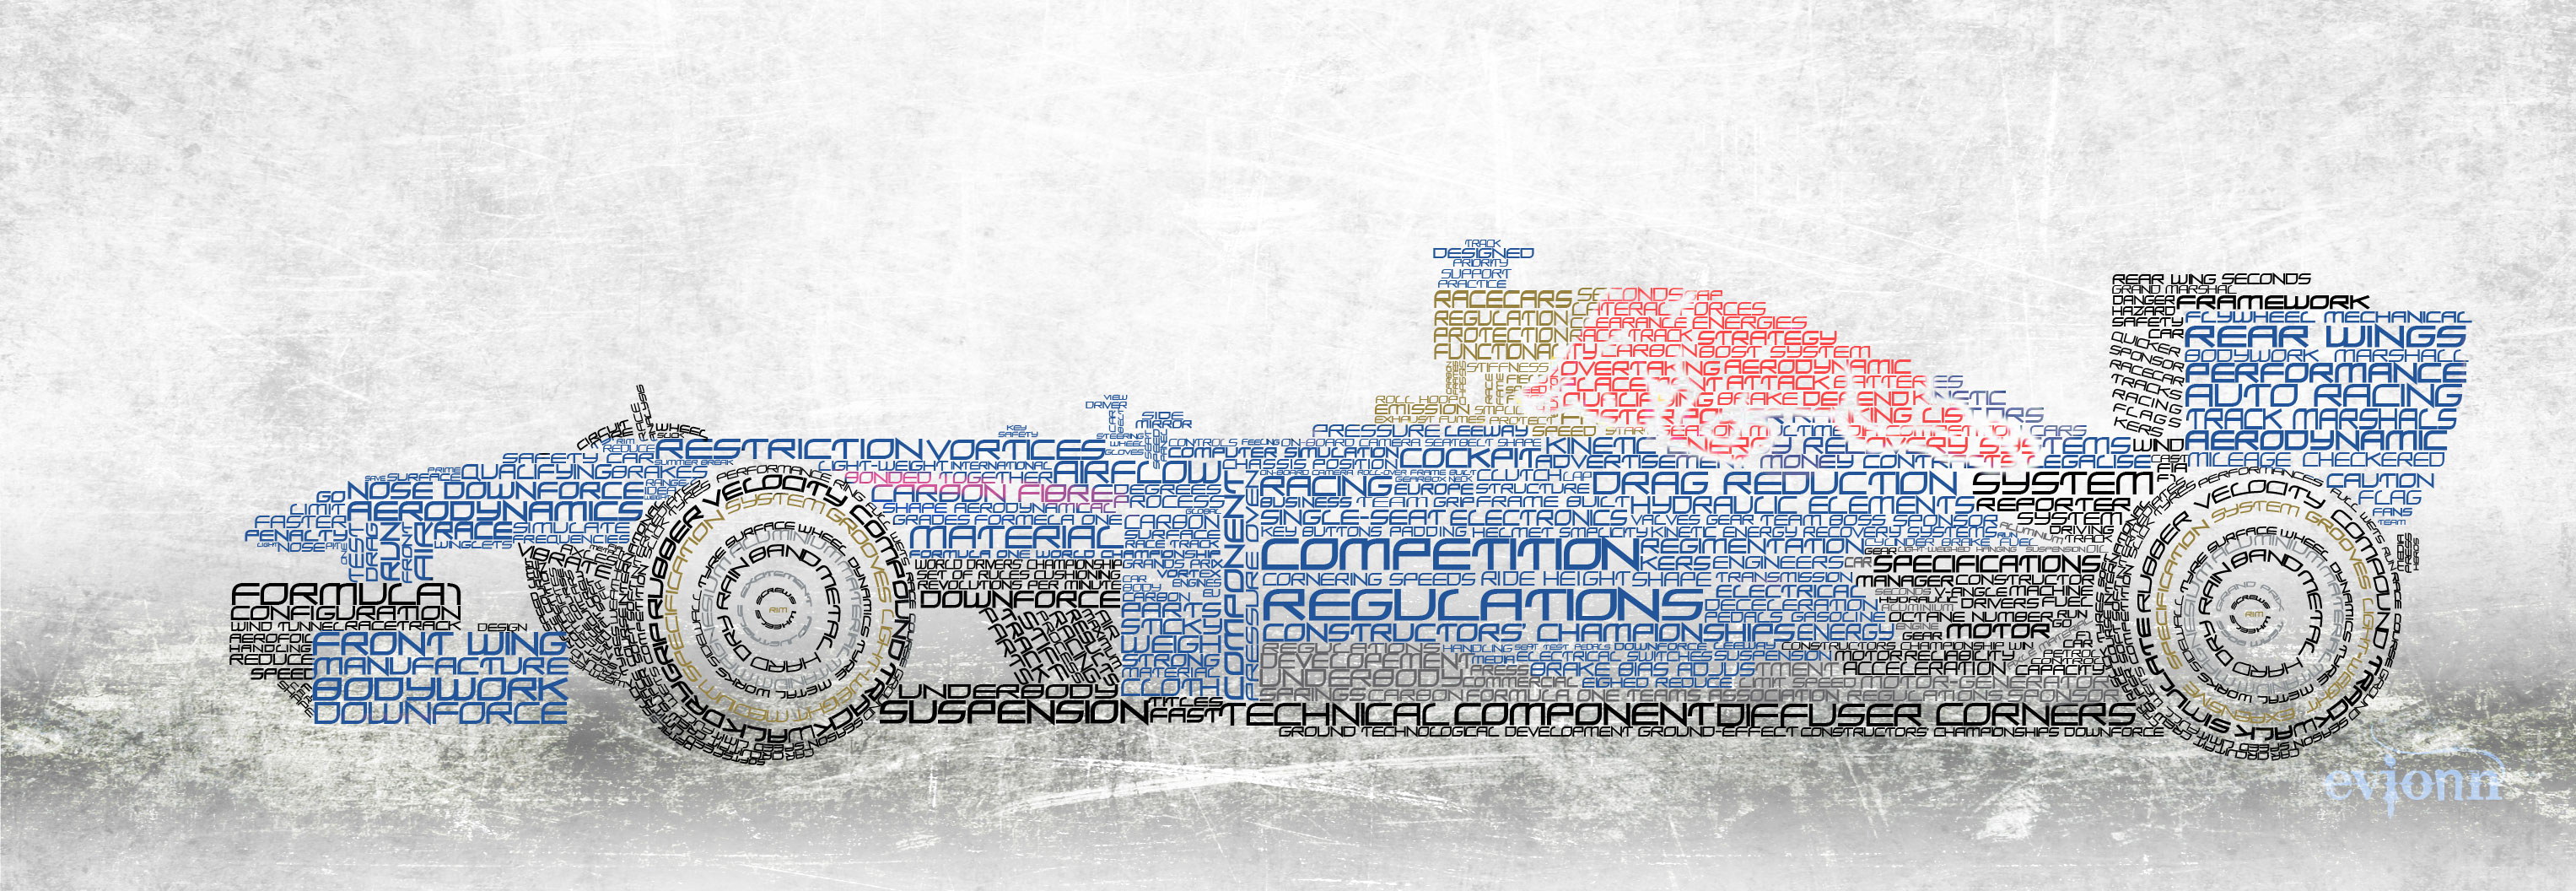 LetterRacingCar Typography Text-based Imagery